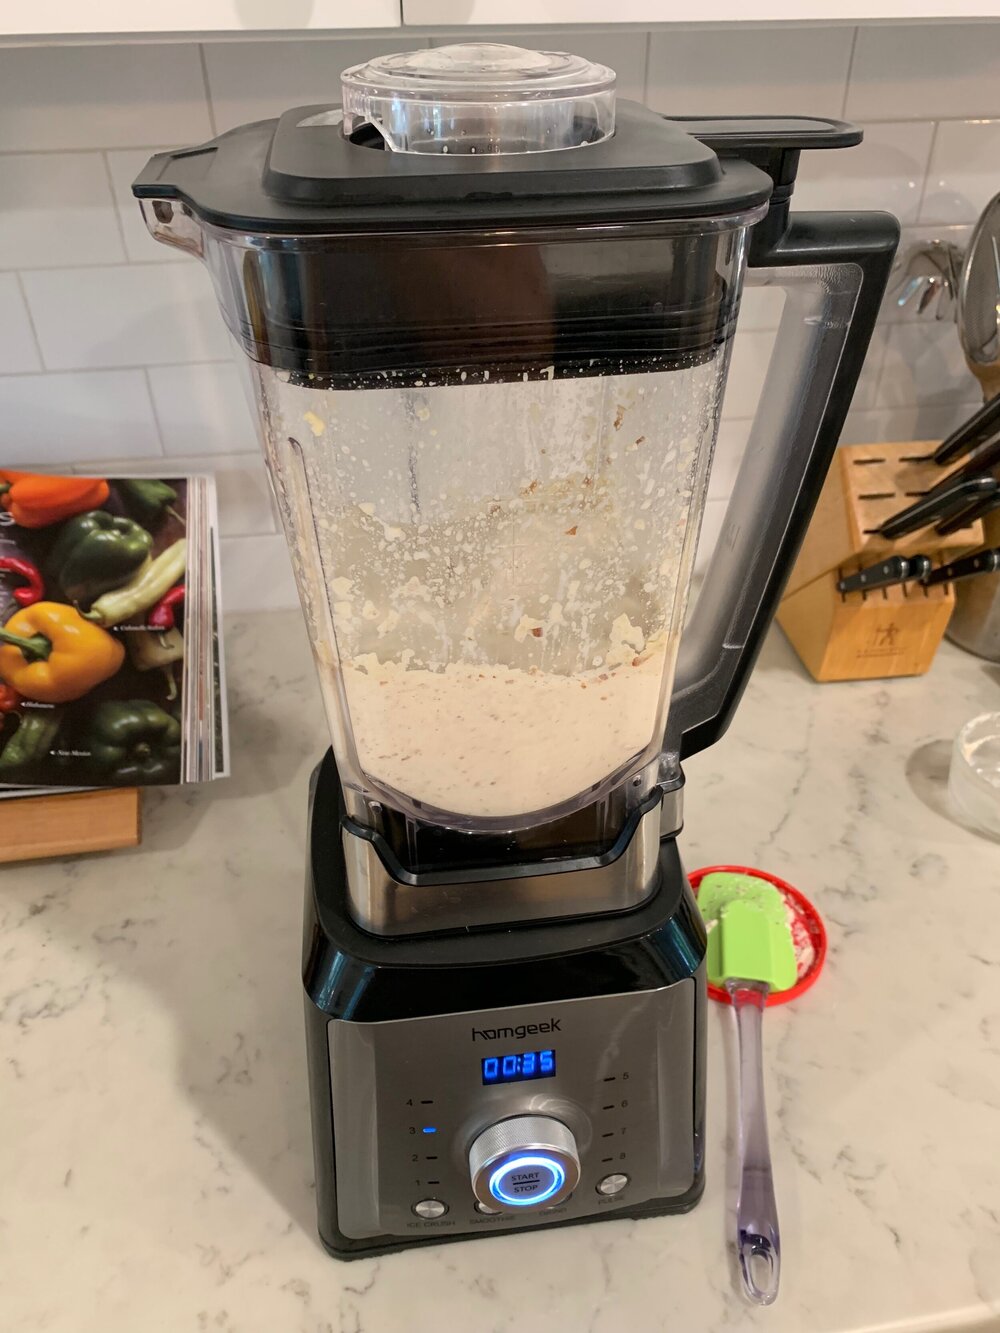 I’m stoked about my new blender! My old Cuisinart died and I couldn’t justify paying $400 for a Vitamix. I found this one on Amazon for about $70. I love it so far!